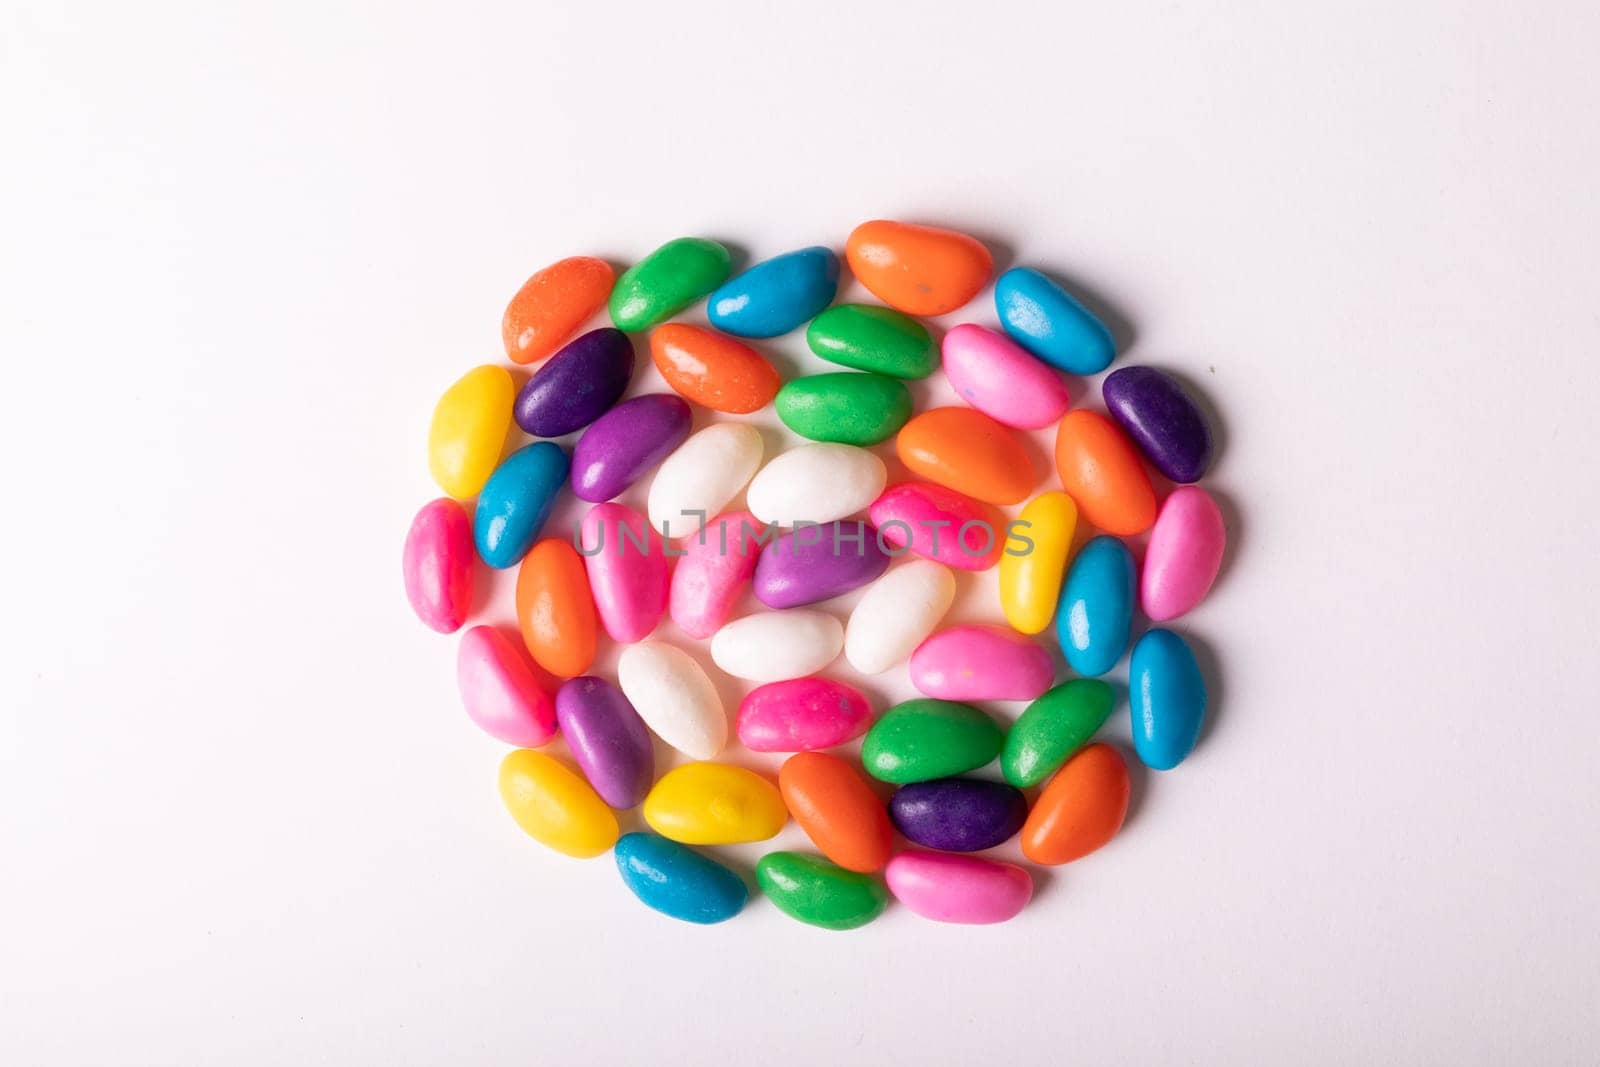 Overhead view of multi colored candies arranged in circle over white background with copy space. unaltered, sweet food and unhealthy eating concept.